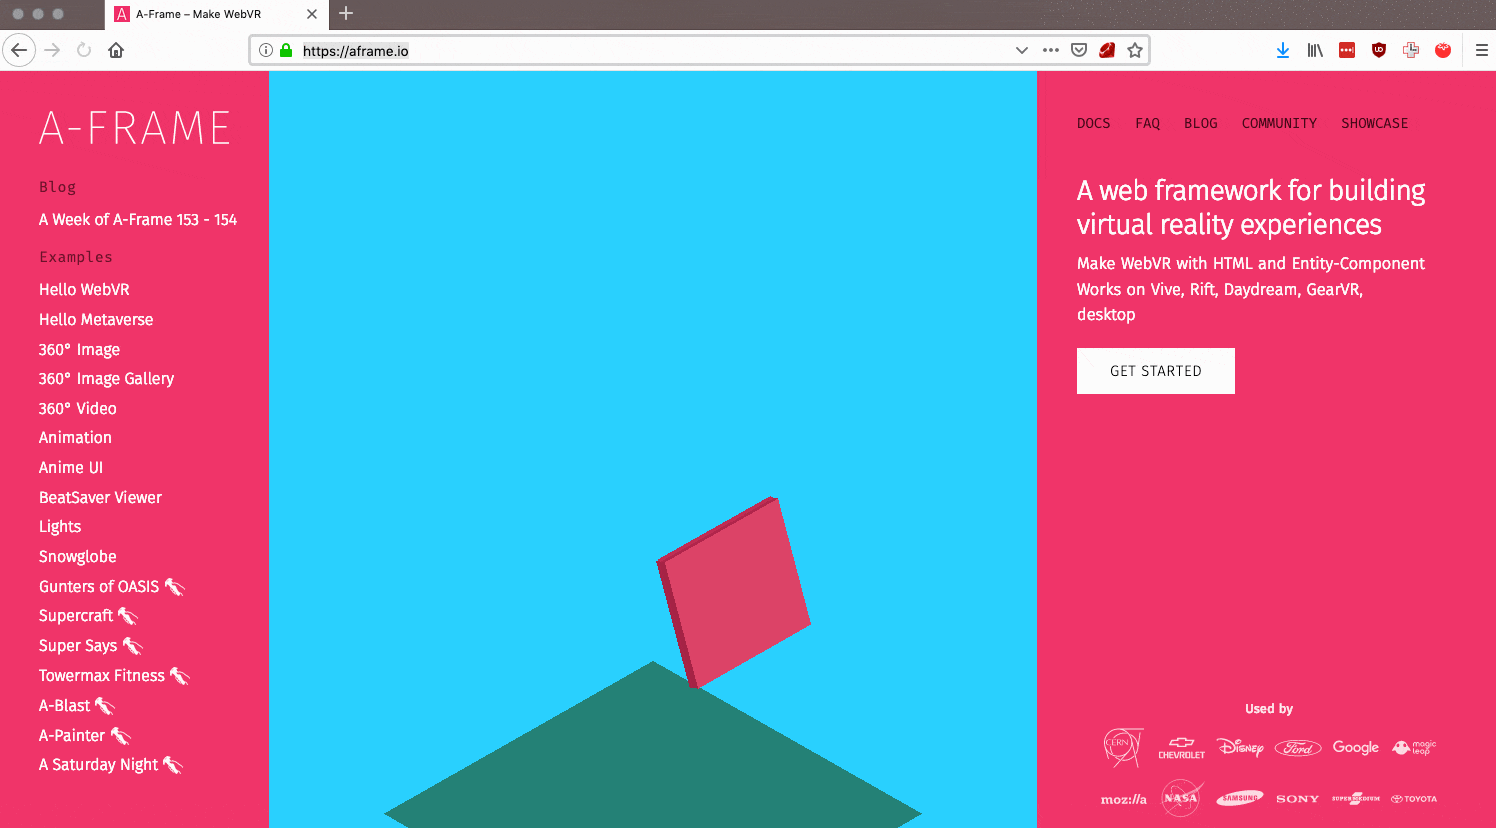 A-Frame website, with loading animation